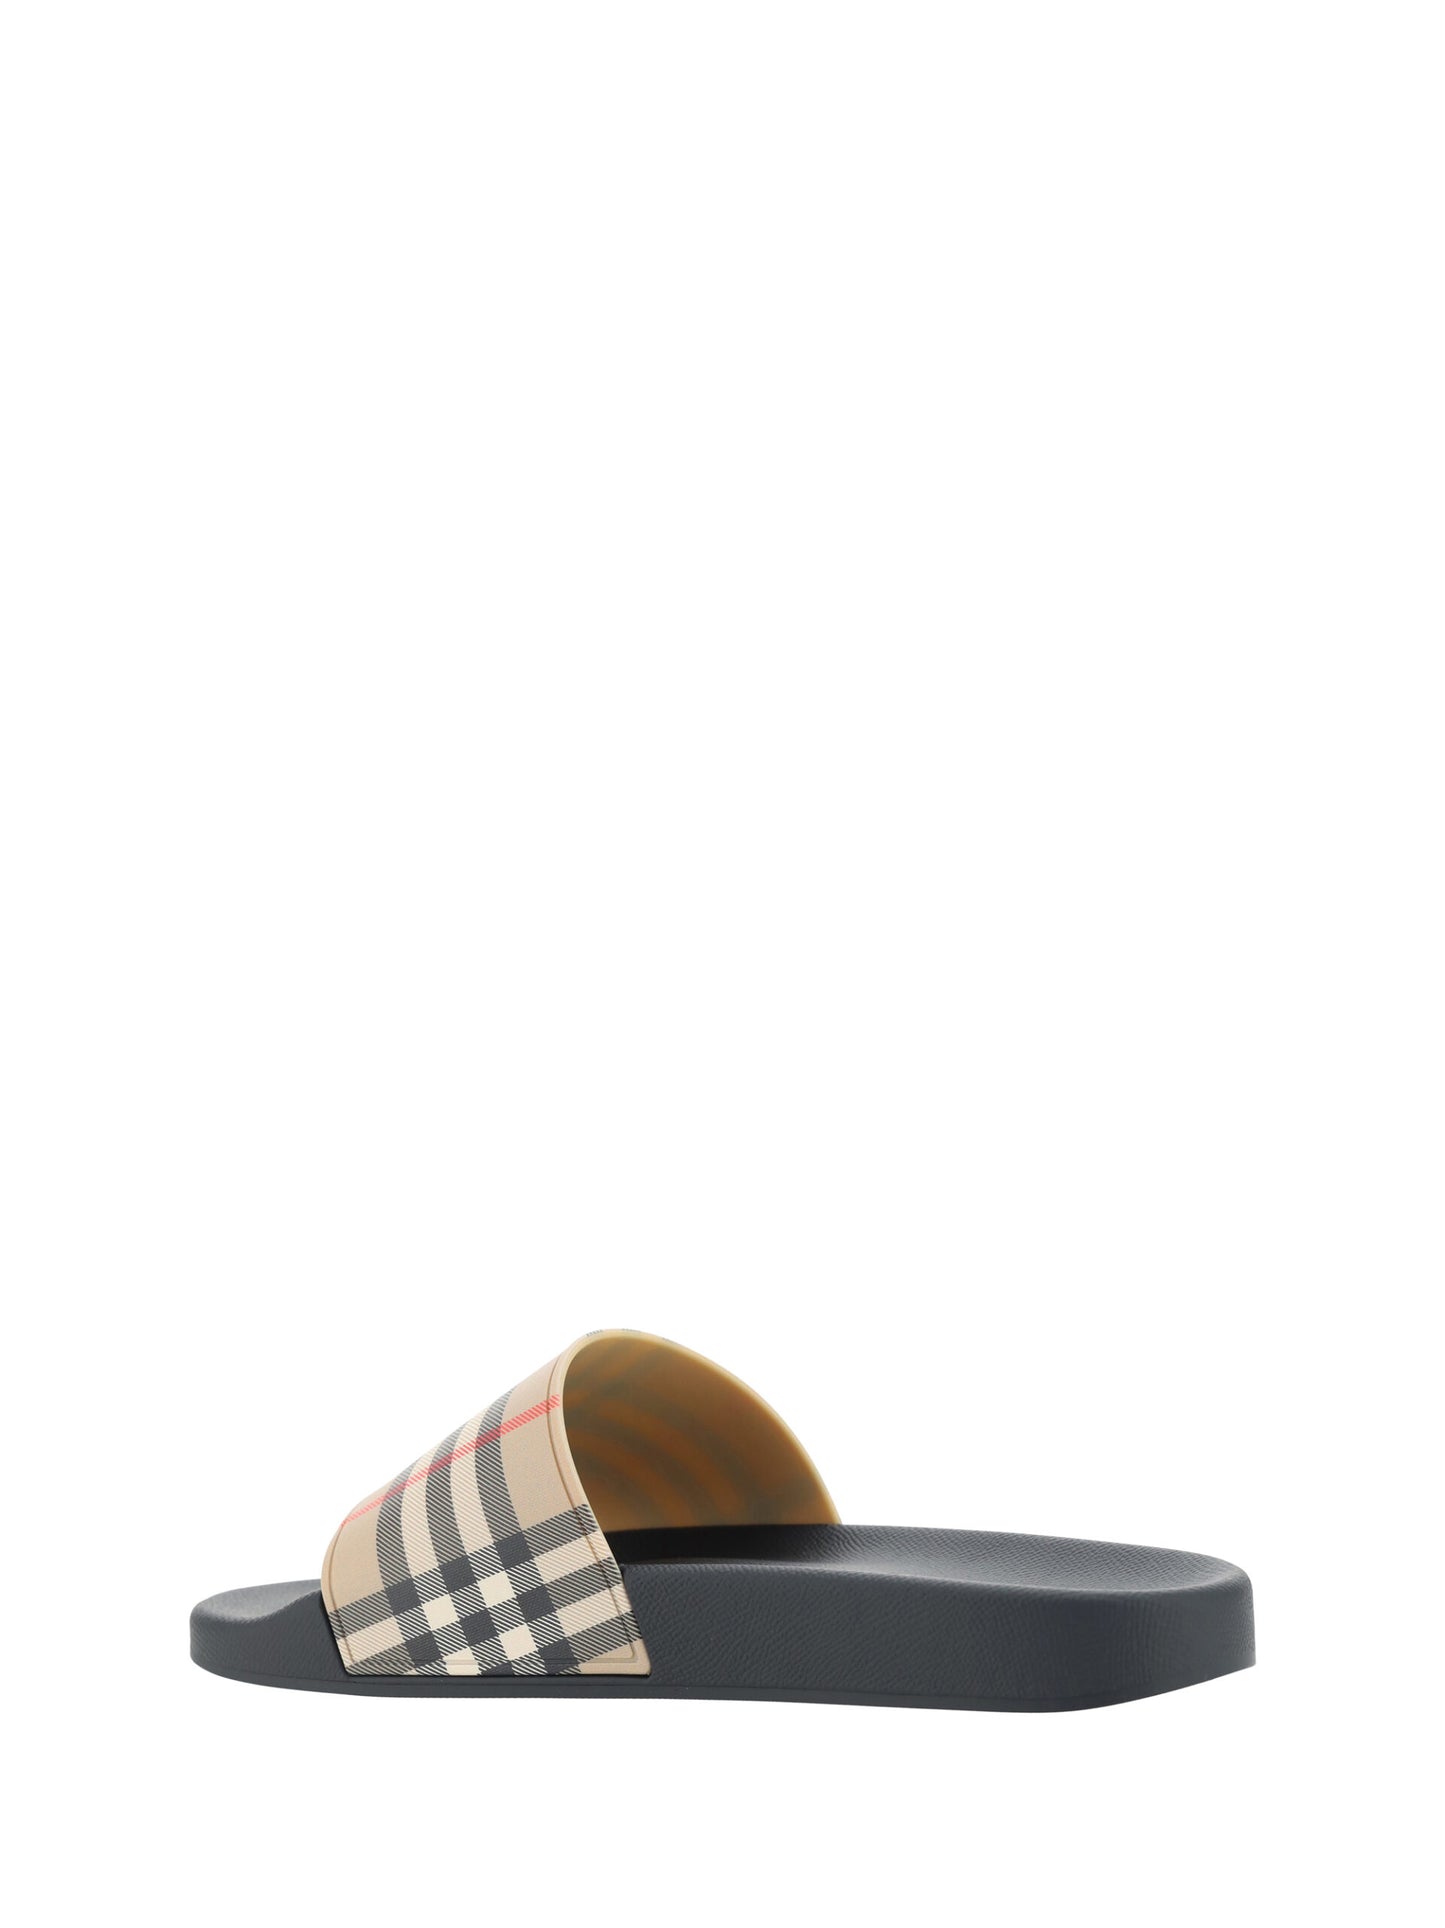 Burberry Archive Beige Check Slides